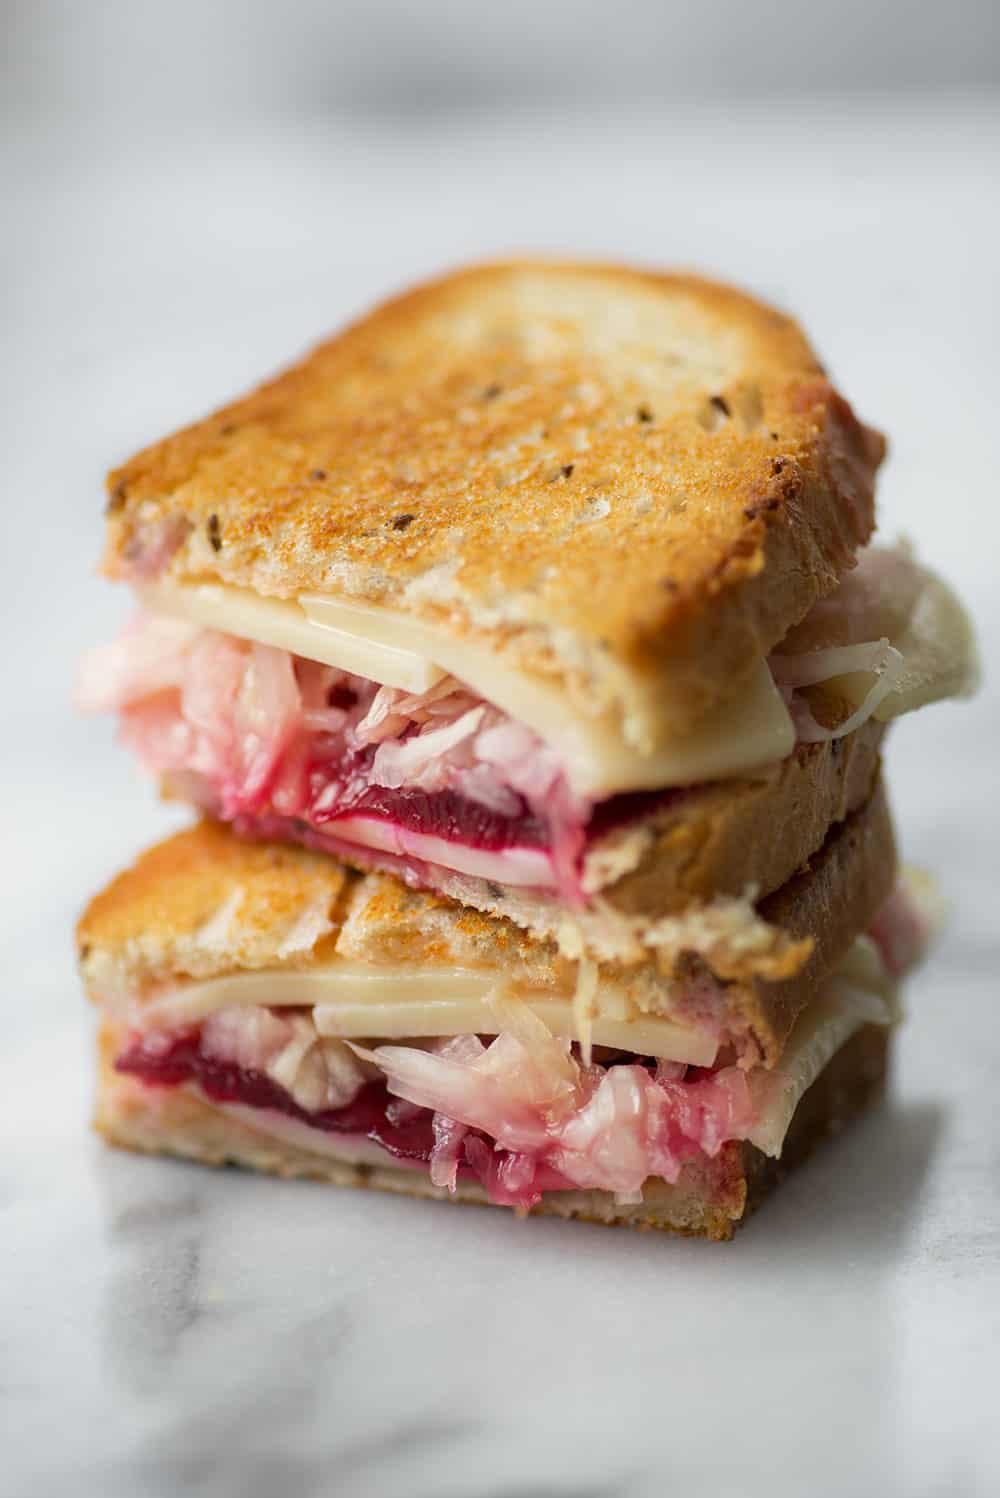 Savor the versatile deliciousness of Aunt Nellie's beets with this Beet Reuben Sandwich